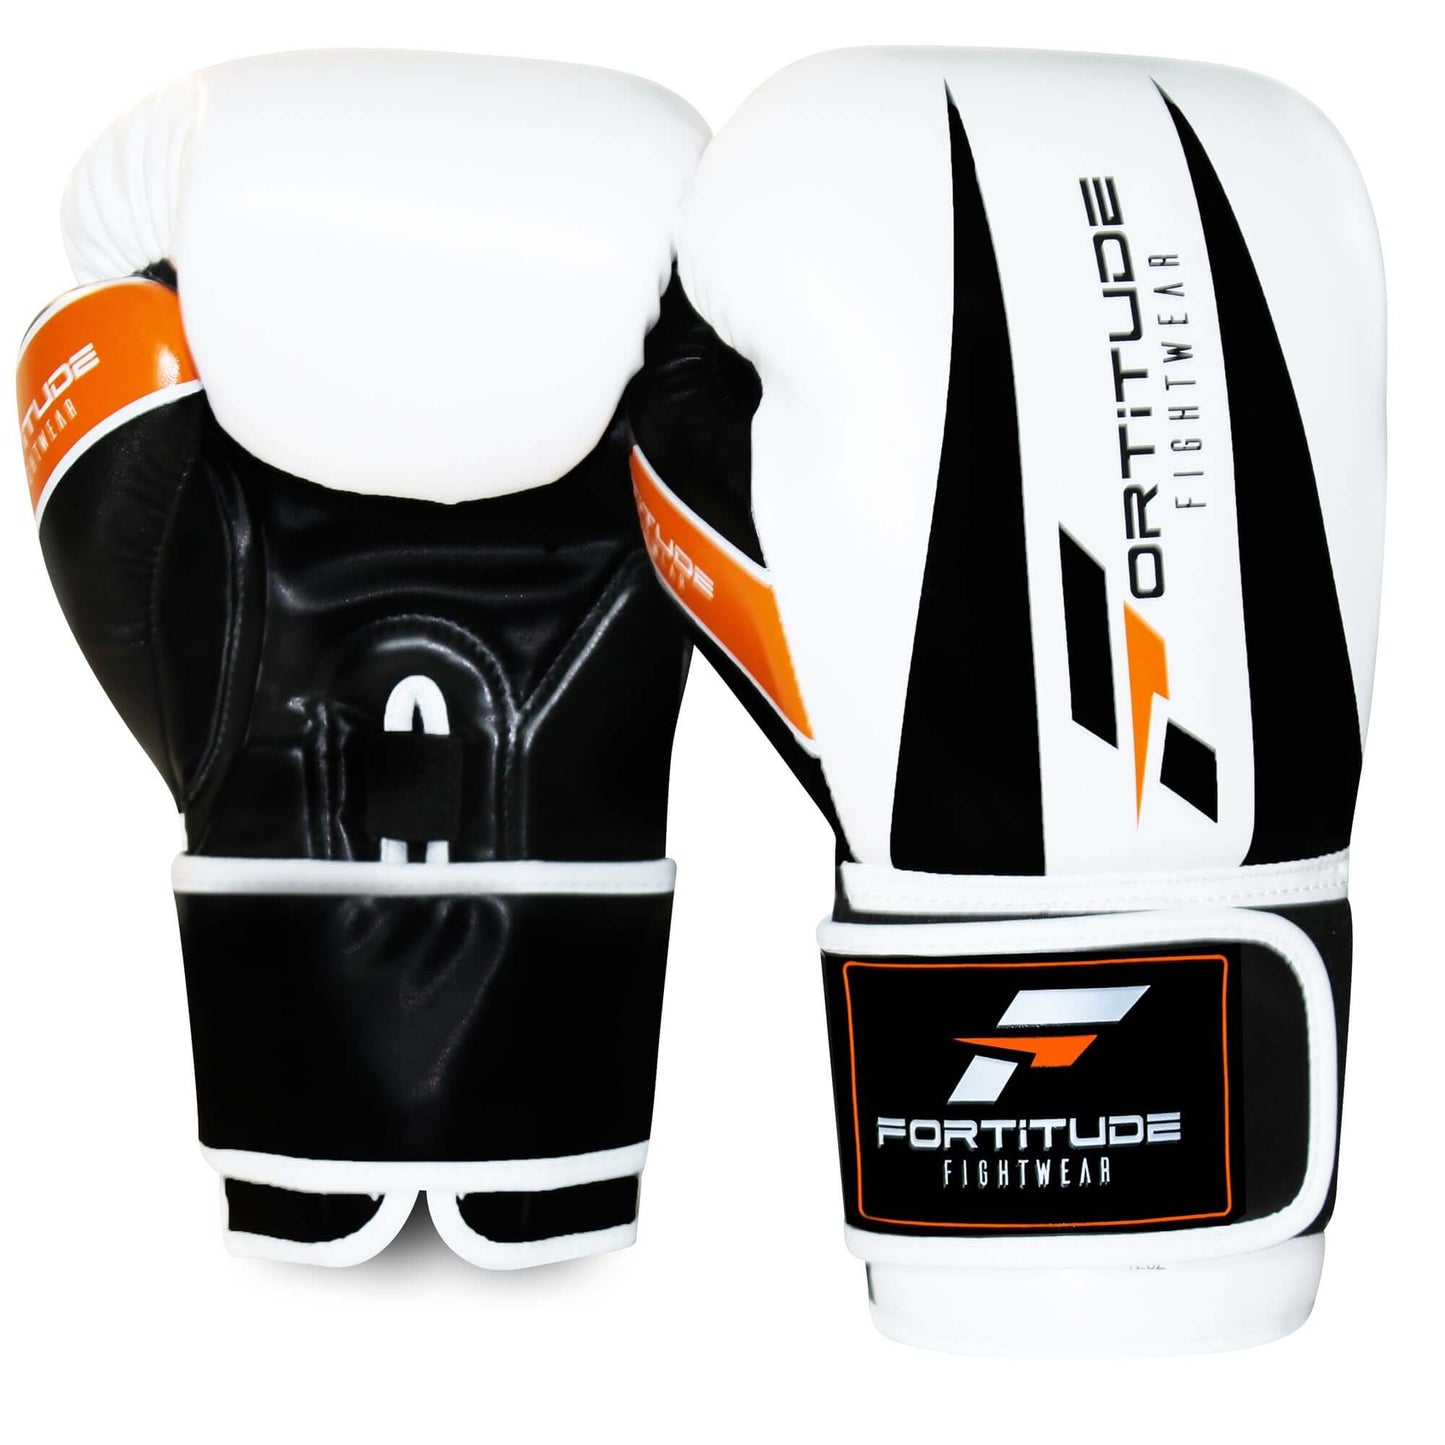 Fortitude Fightwear Leather Boxing Gloves 12oz (Pair)